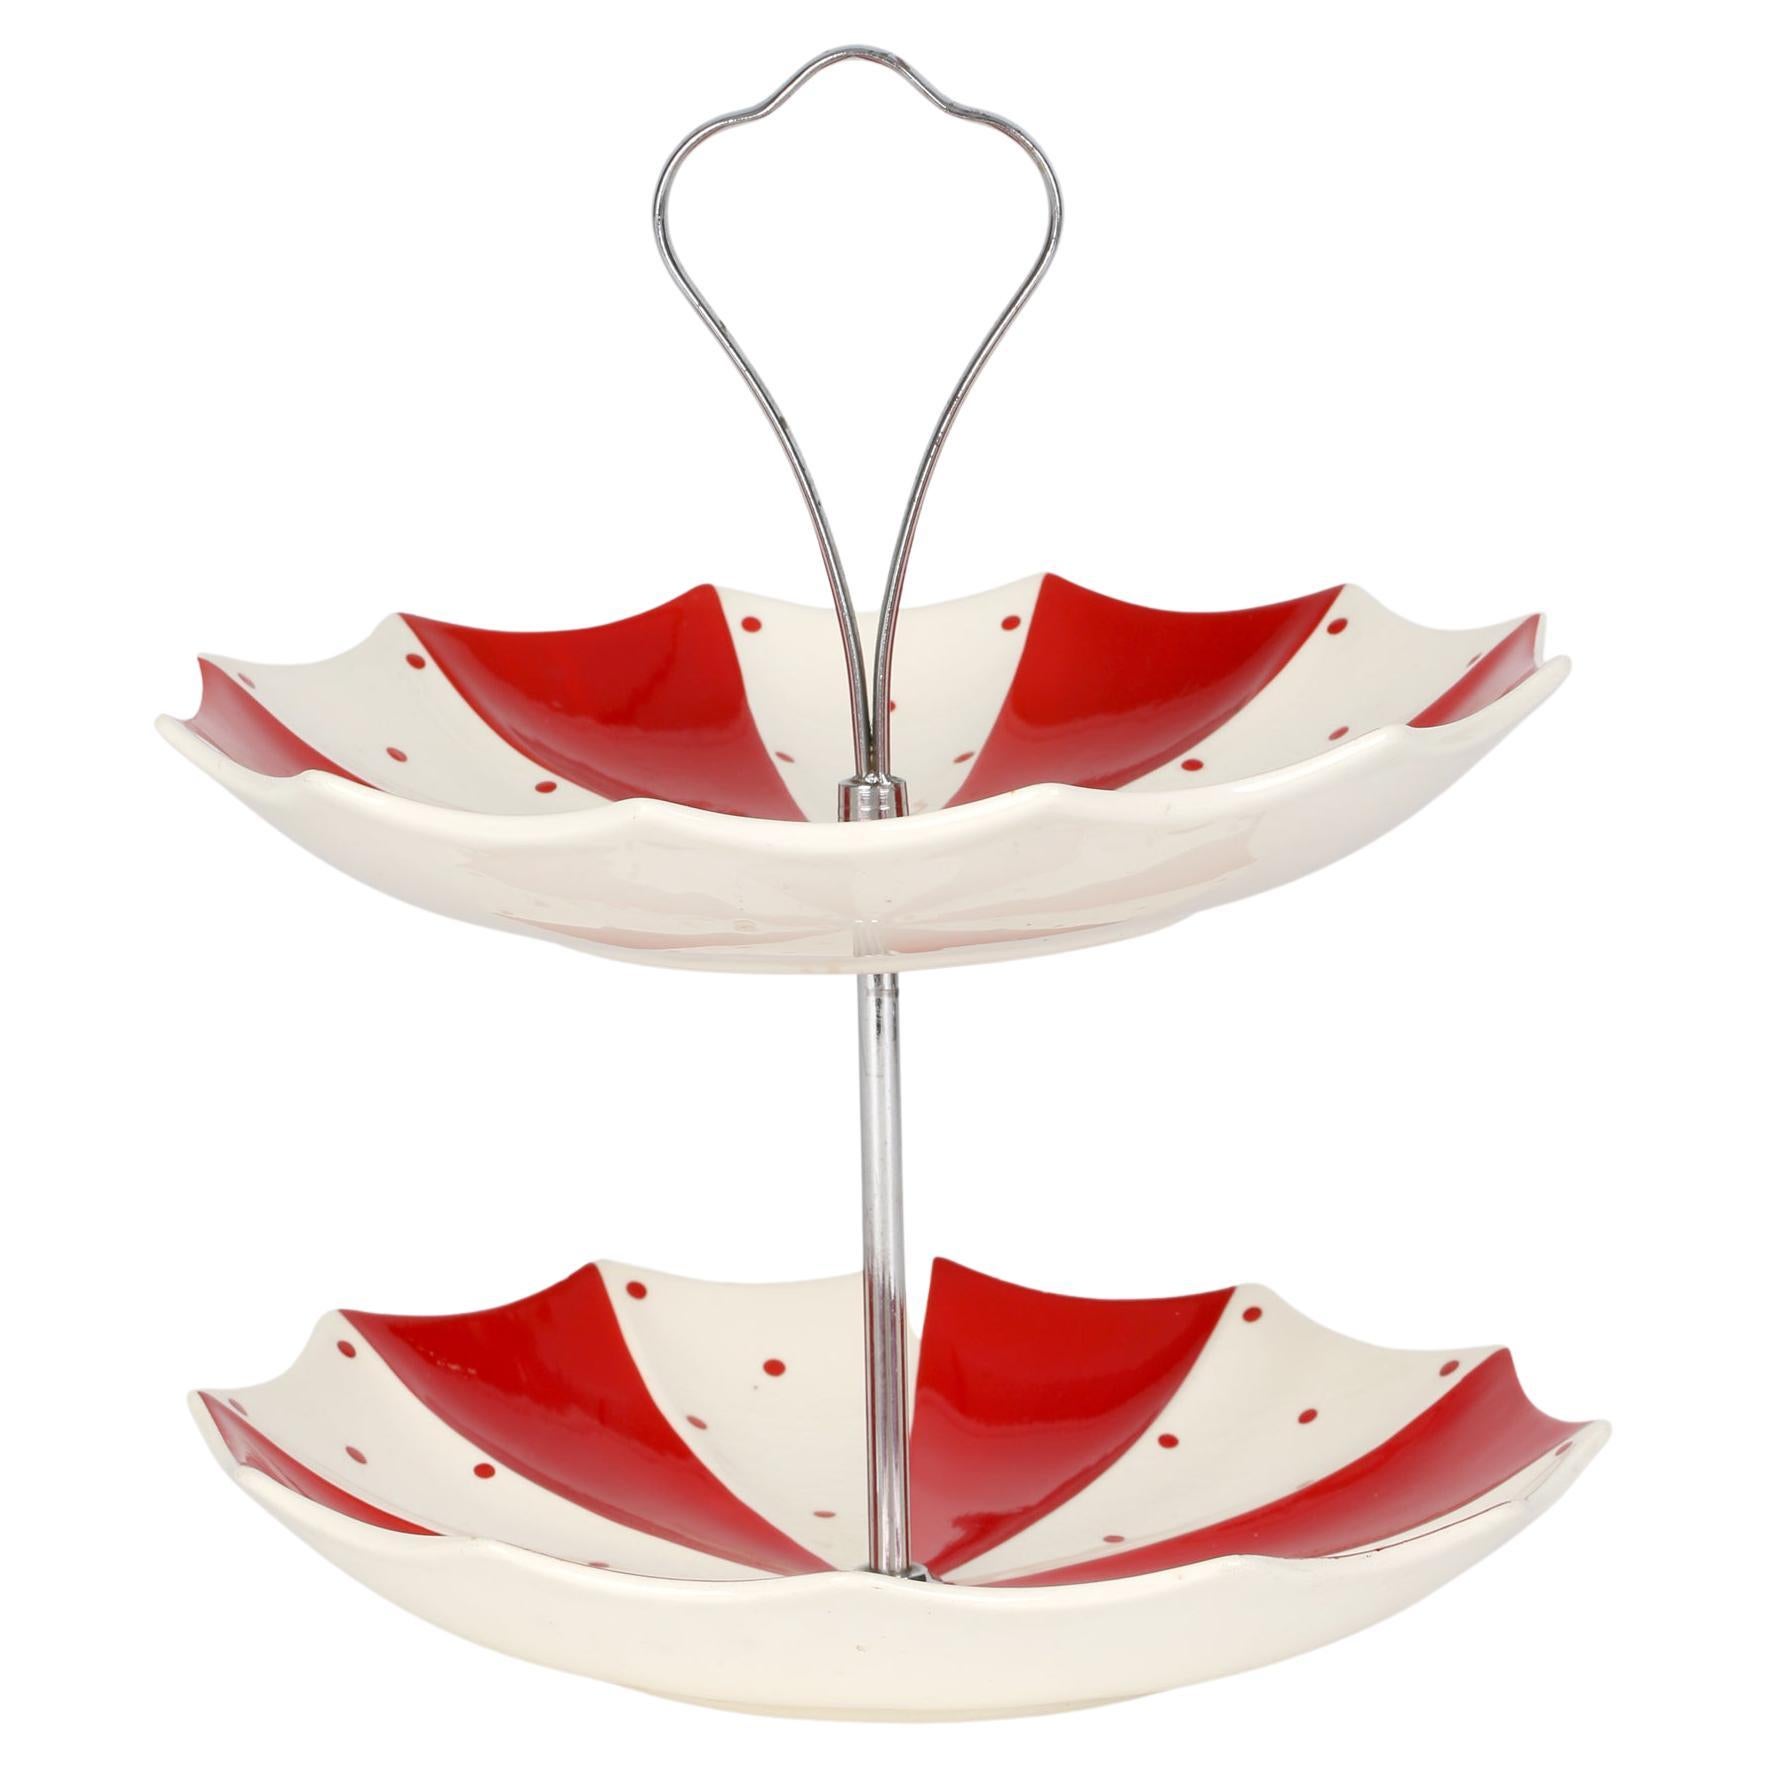 Jessie Tate Midwinter Modern Fashion Shape Red Domino Two Tier Cake Stand